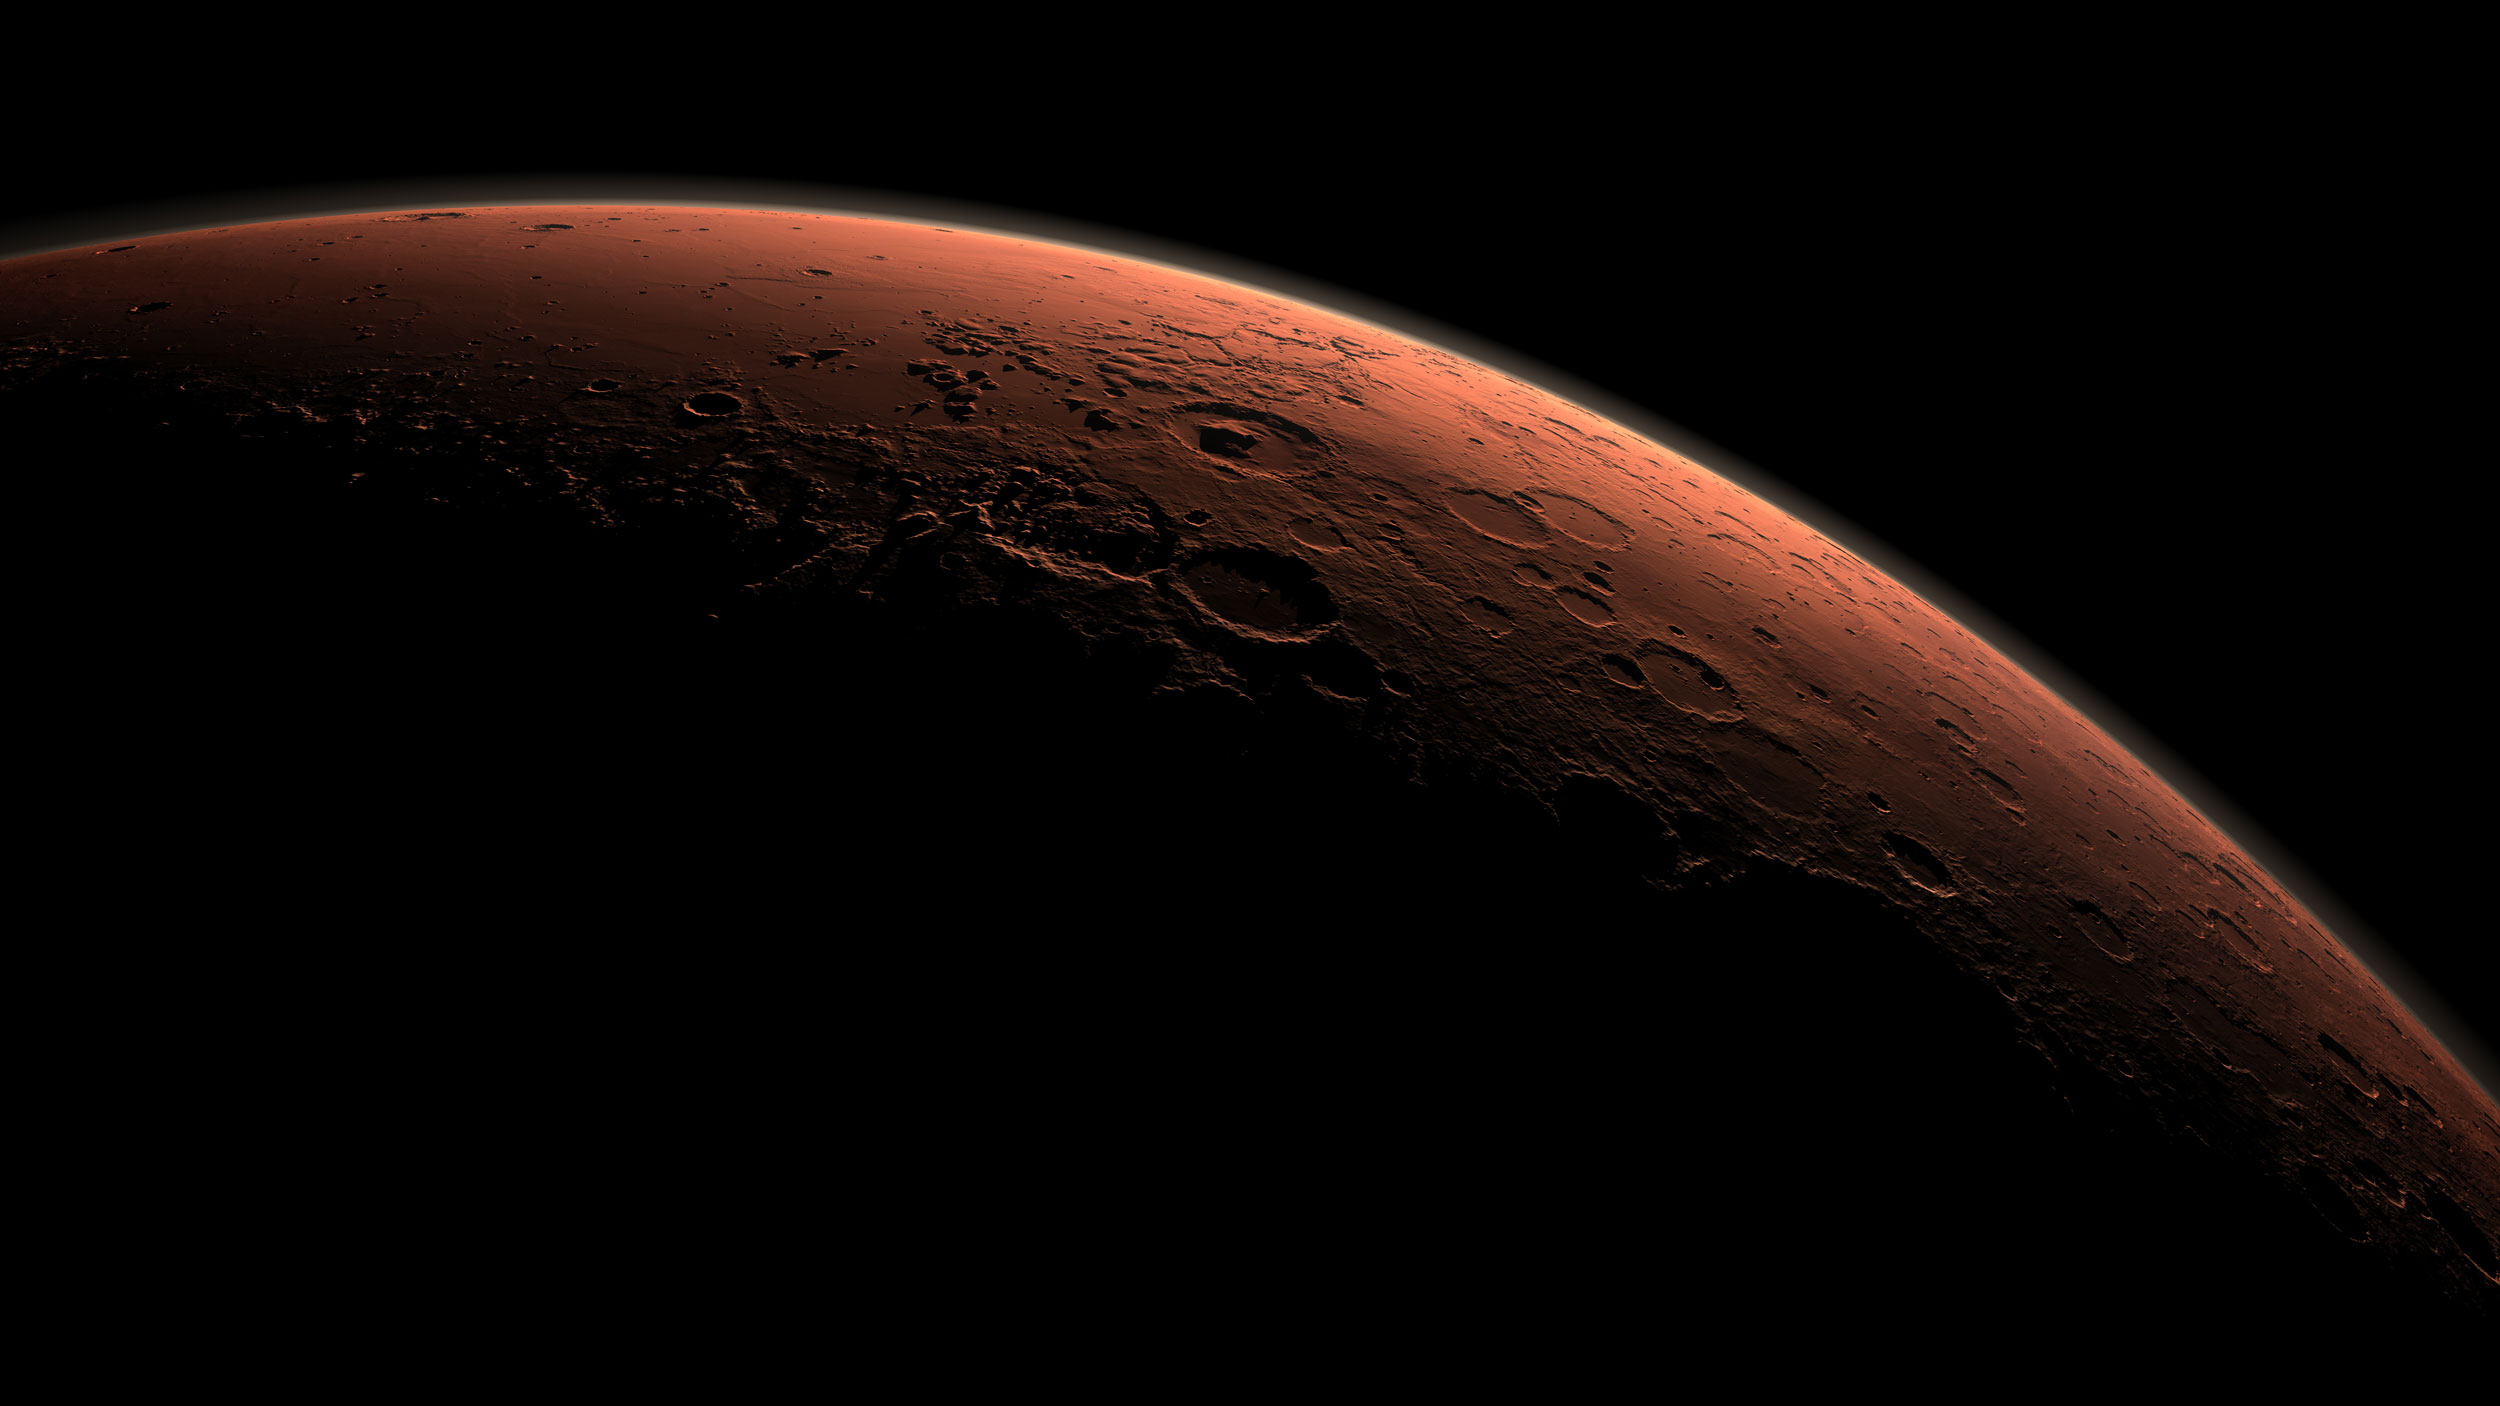 ‘The Time is Now’ for America’s Journey to Mars